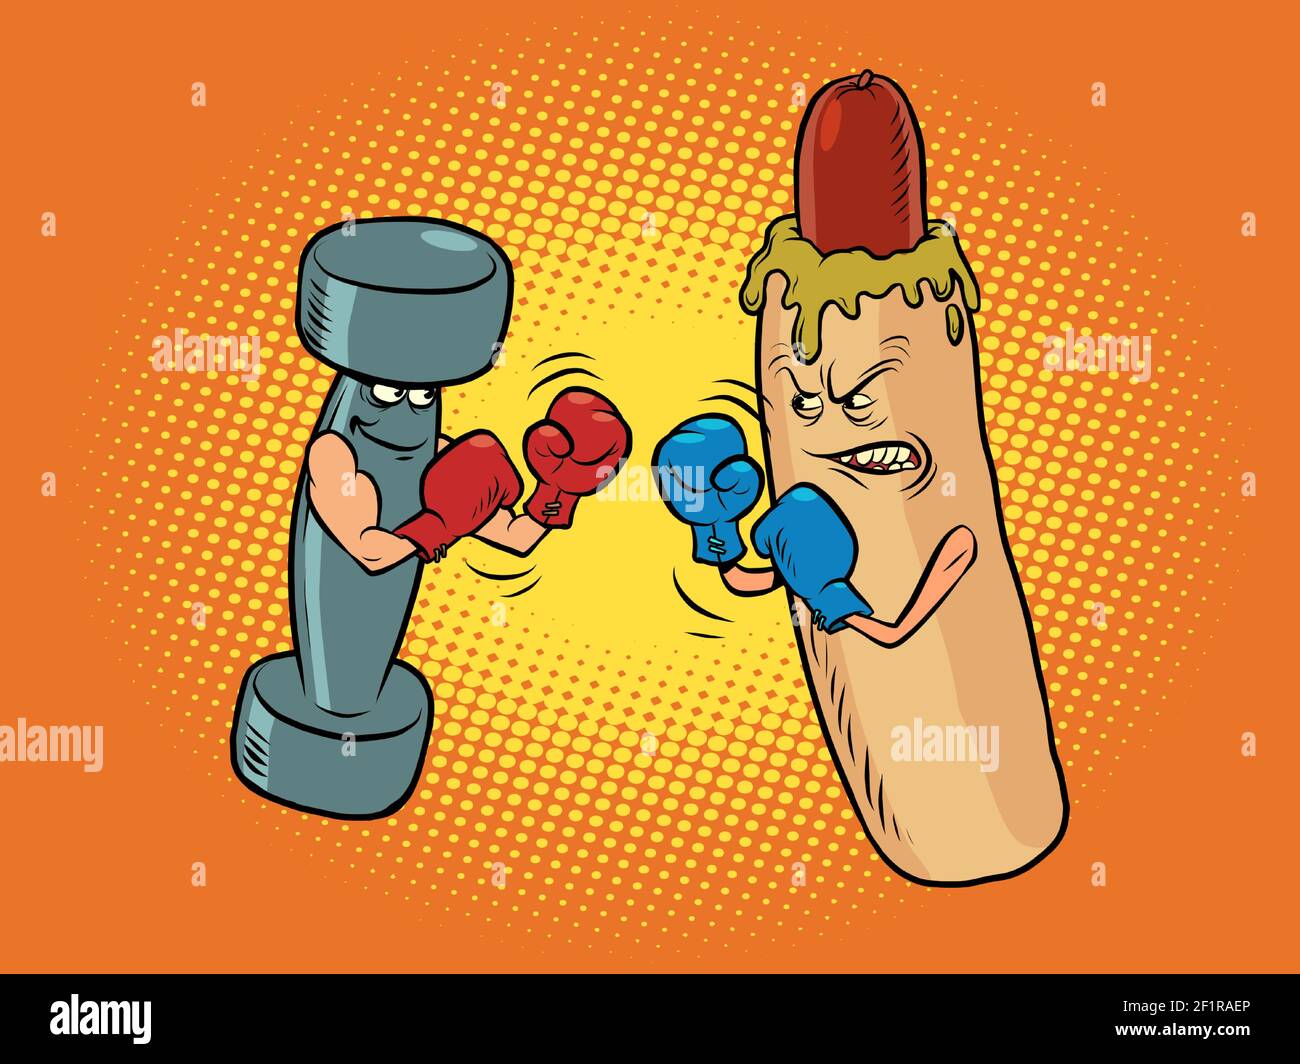 hot dog and dumbbell boxing. Healthy and harmful lifestyle Stock Vector